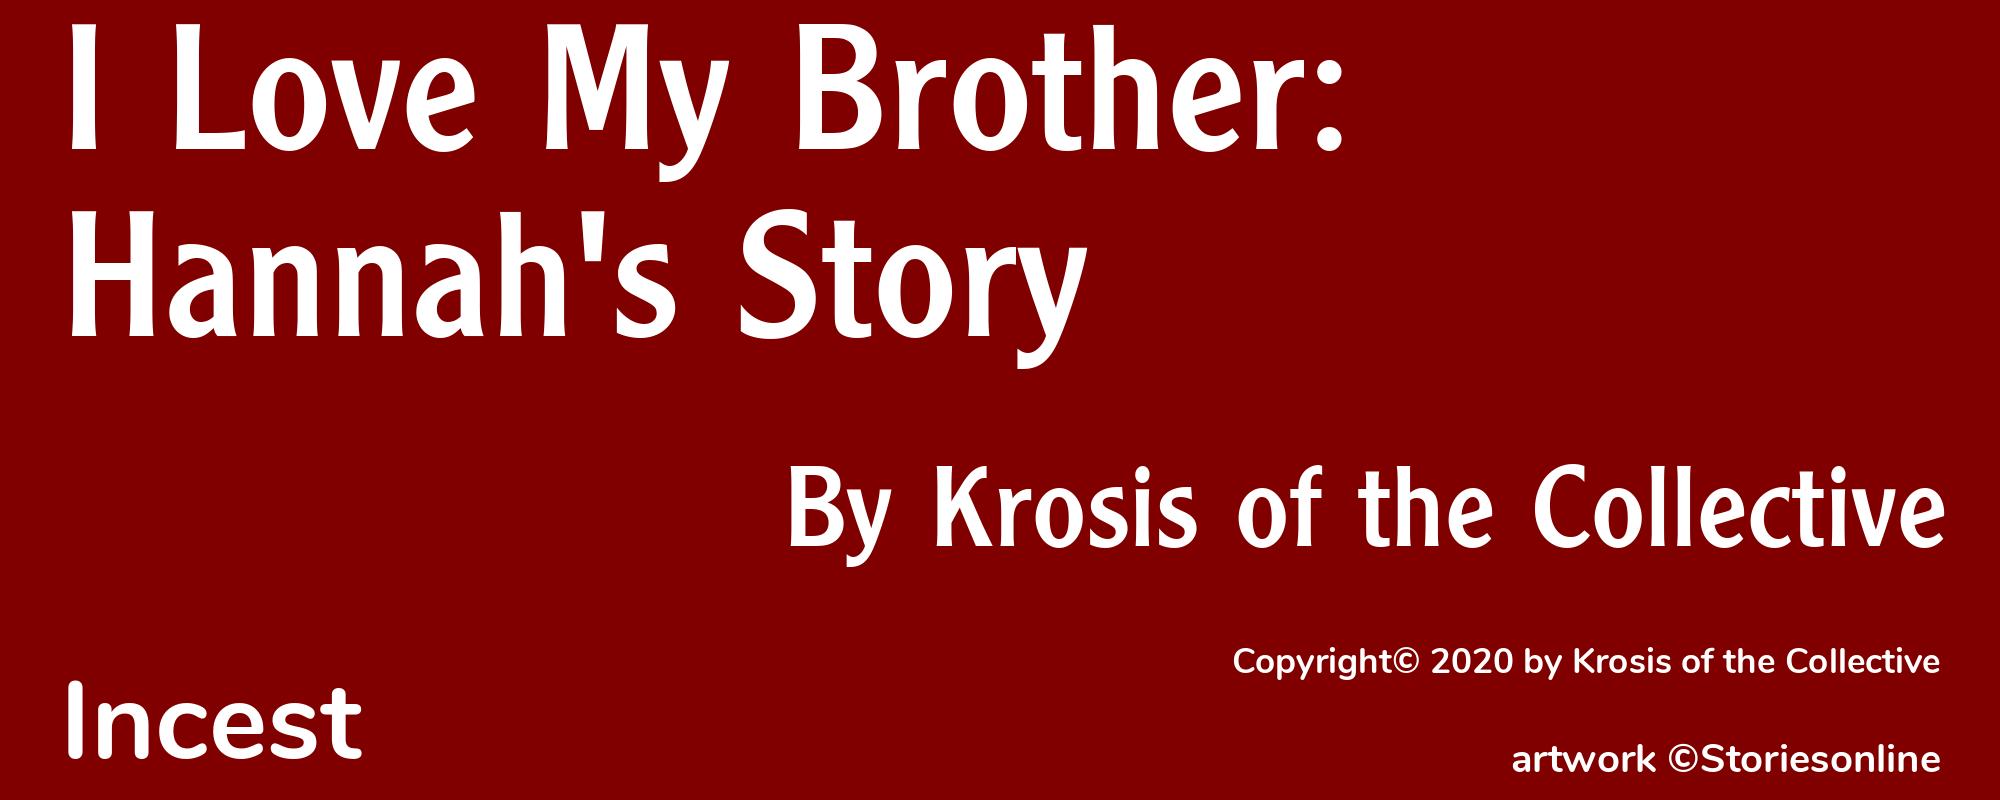 I Love My Brother: Hannah's Story - Cover